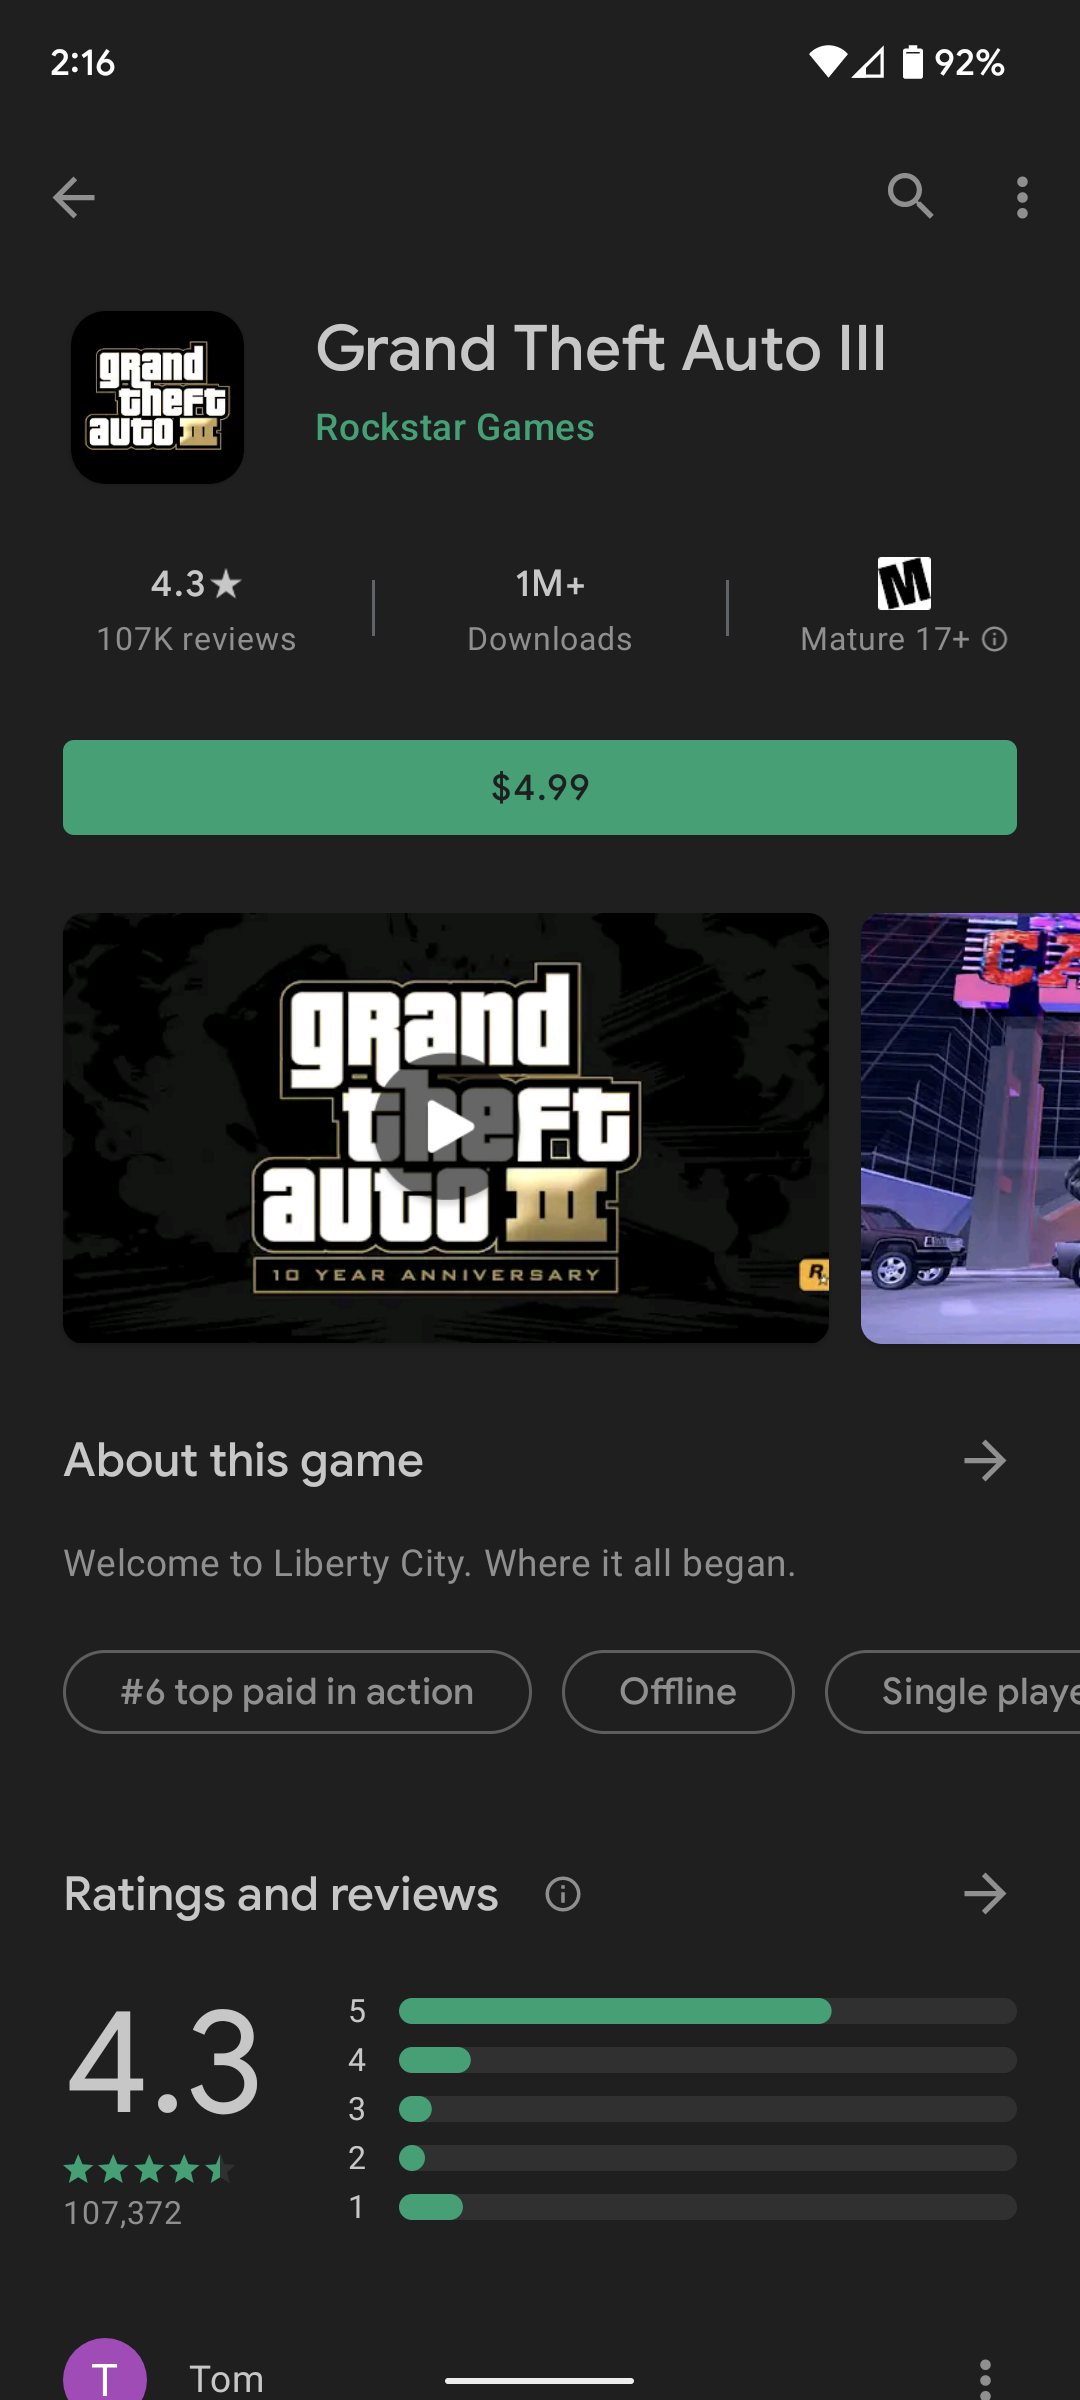 HOW TO DOWNLOAD GTA 5 ON YOUR OSX OR ANDROID DEVICES ANYWHERE